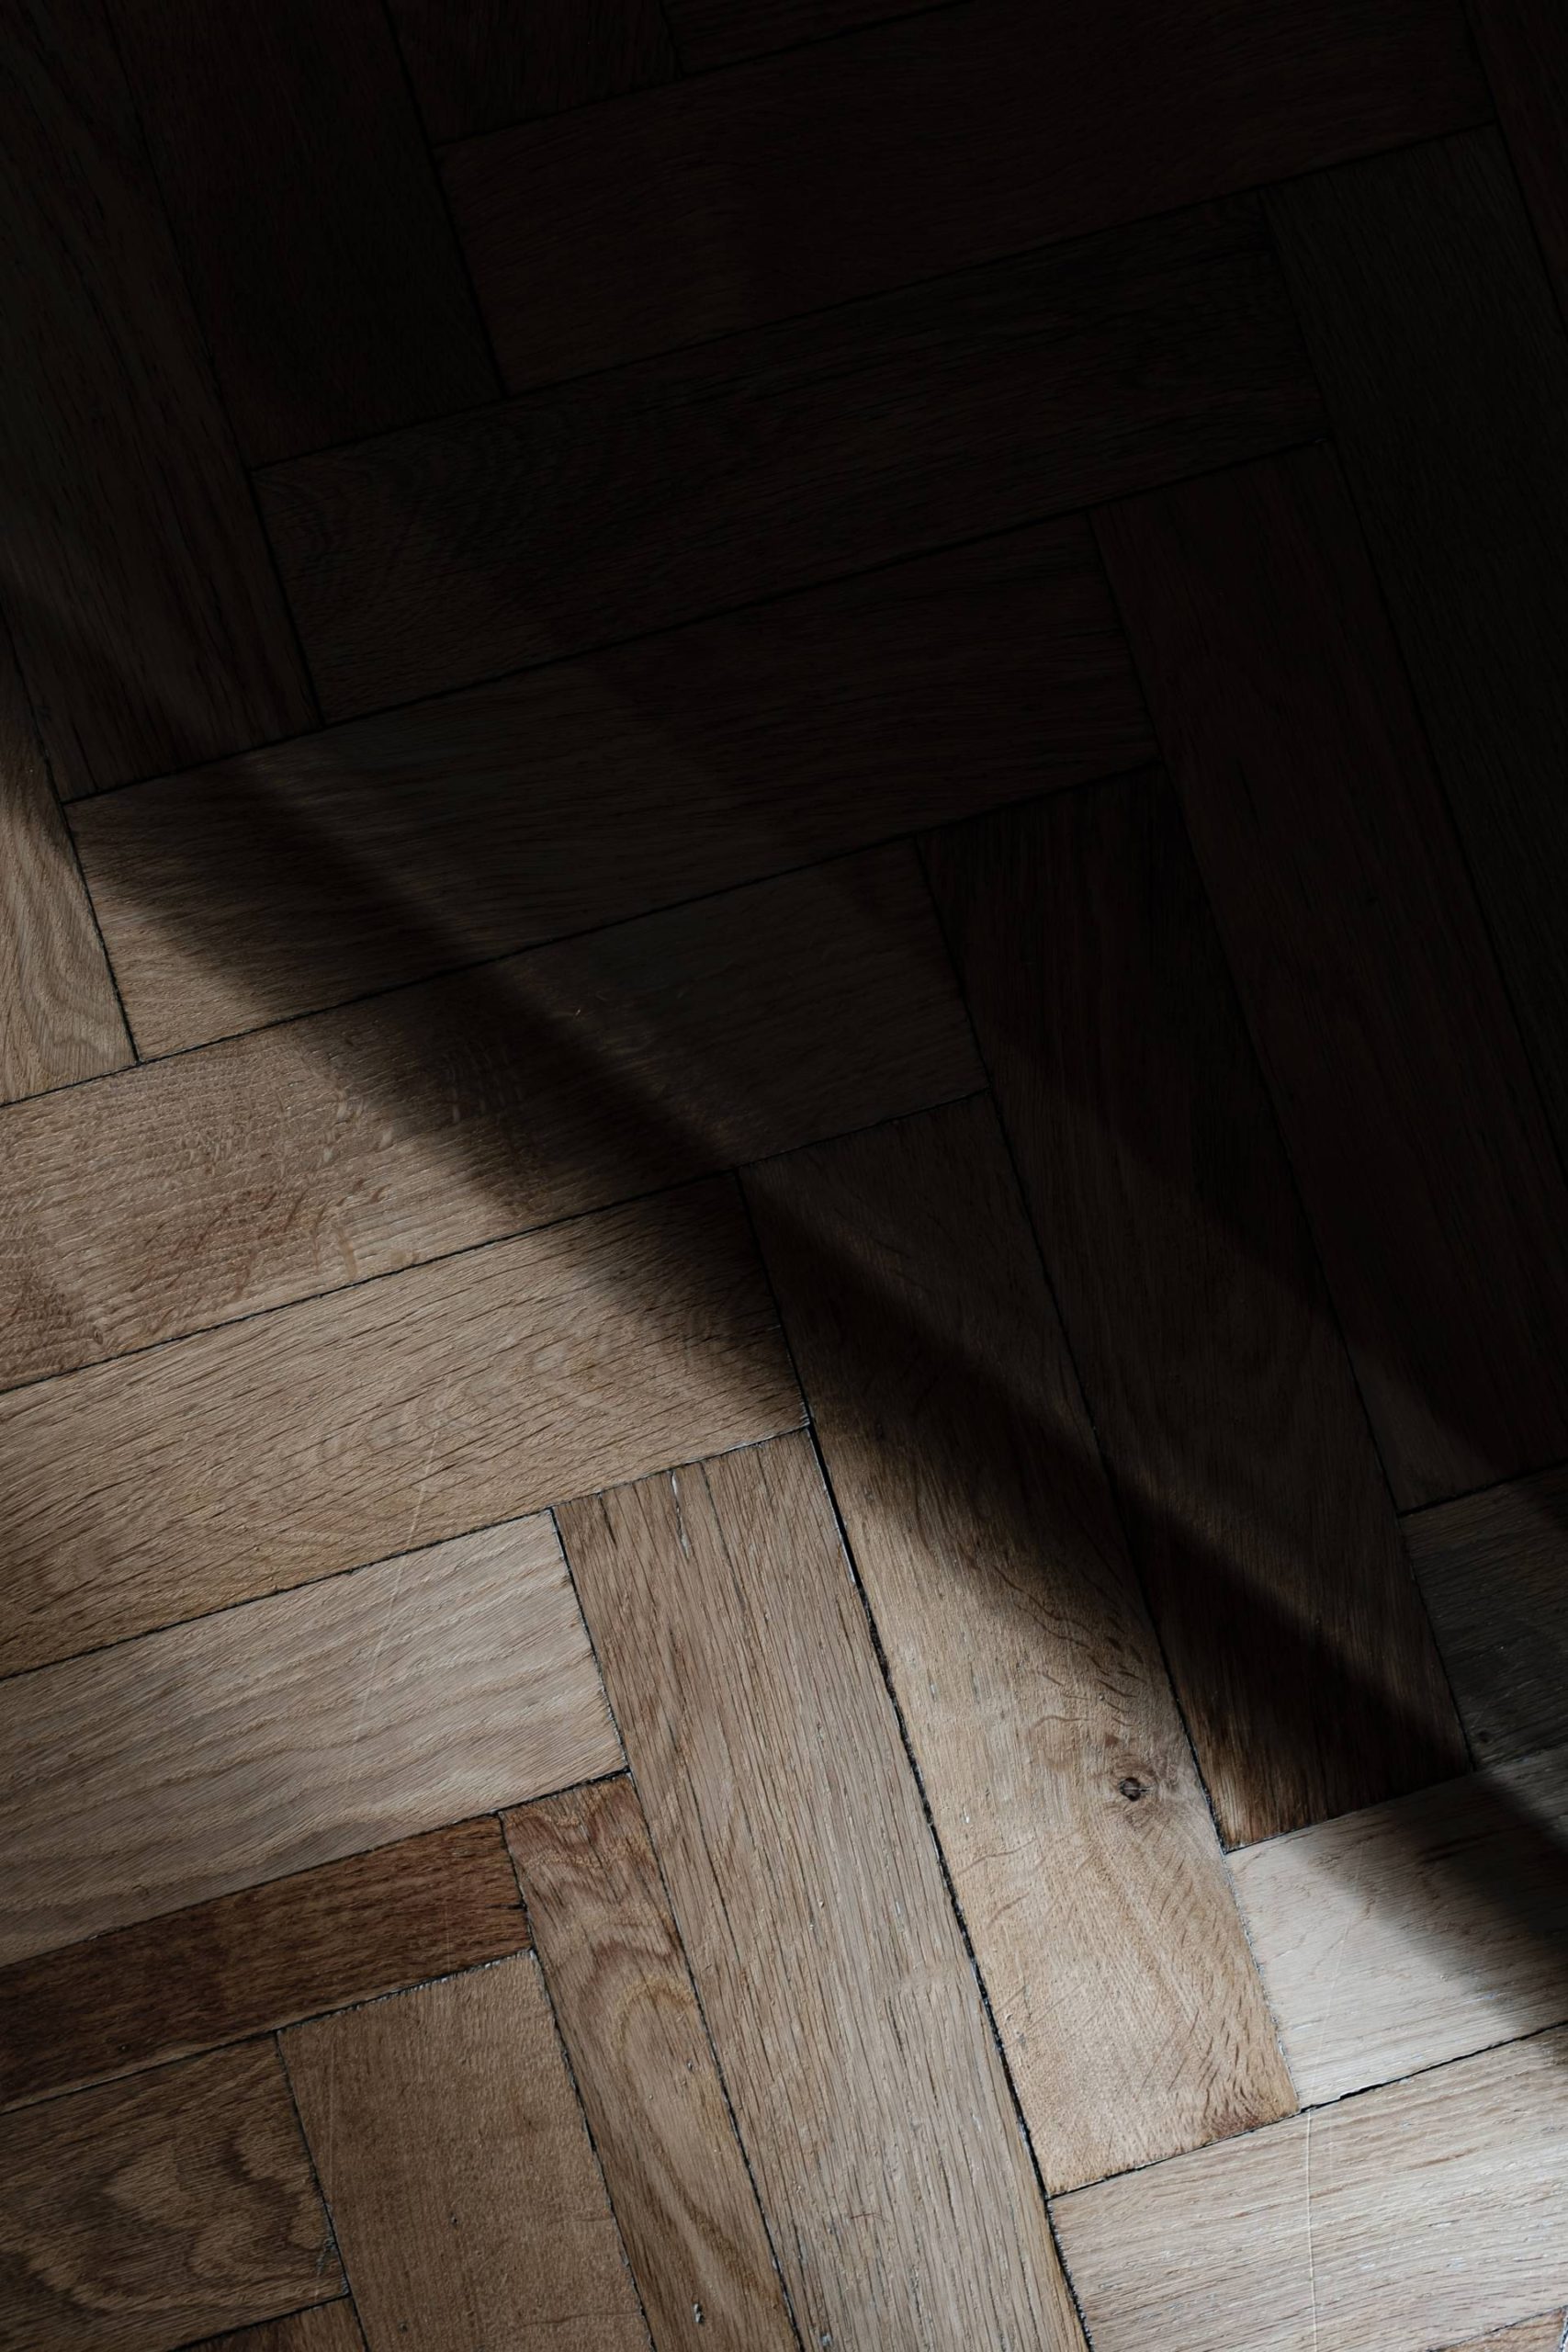 hardwood flooring obscured by a partial shadow